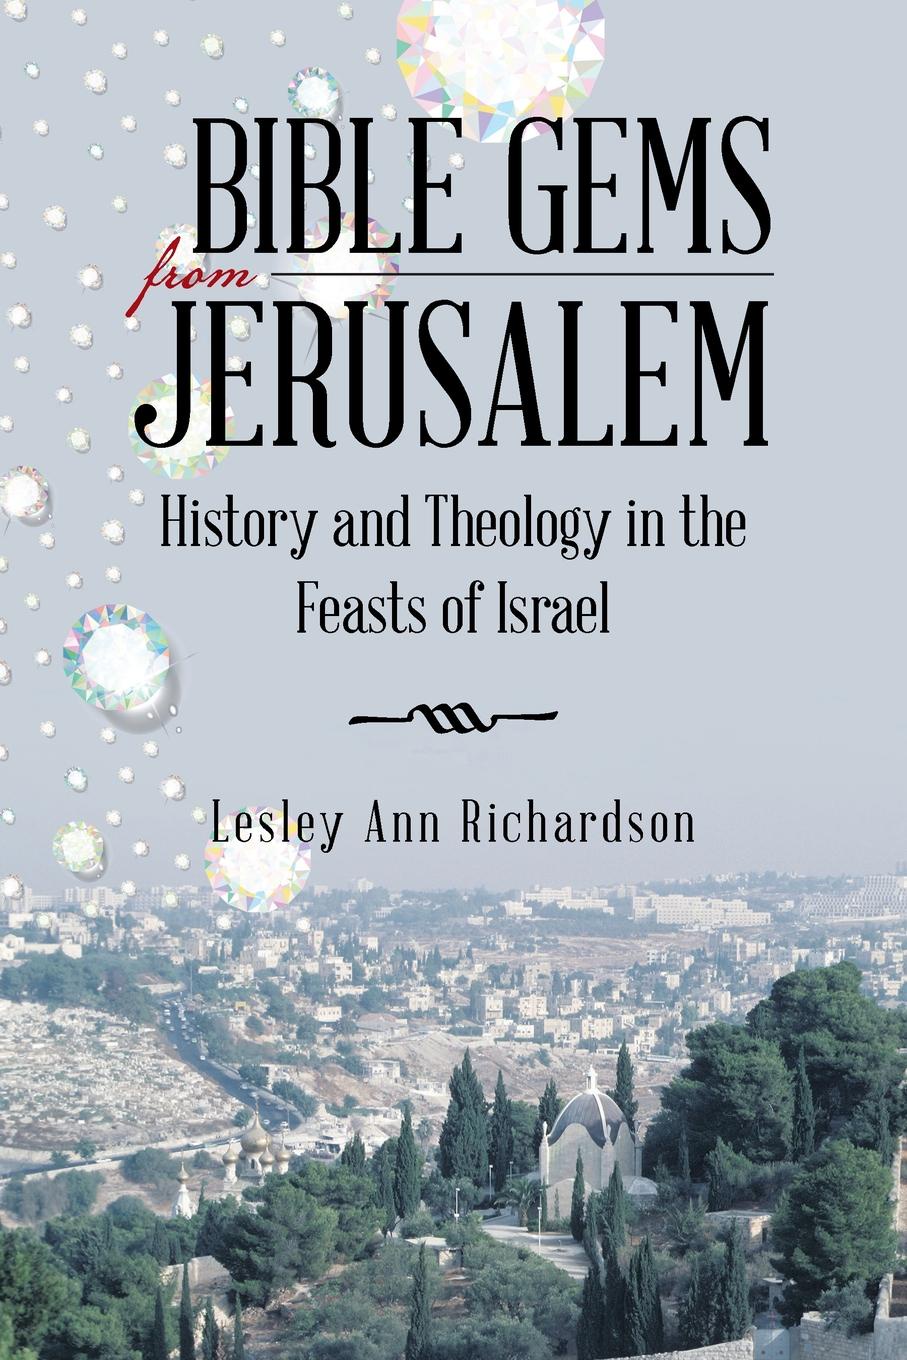 Bible Gems from Jerusalem. History and Theology in the Feasts of Israel